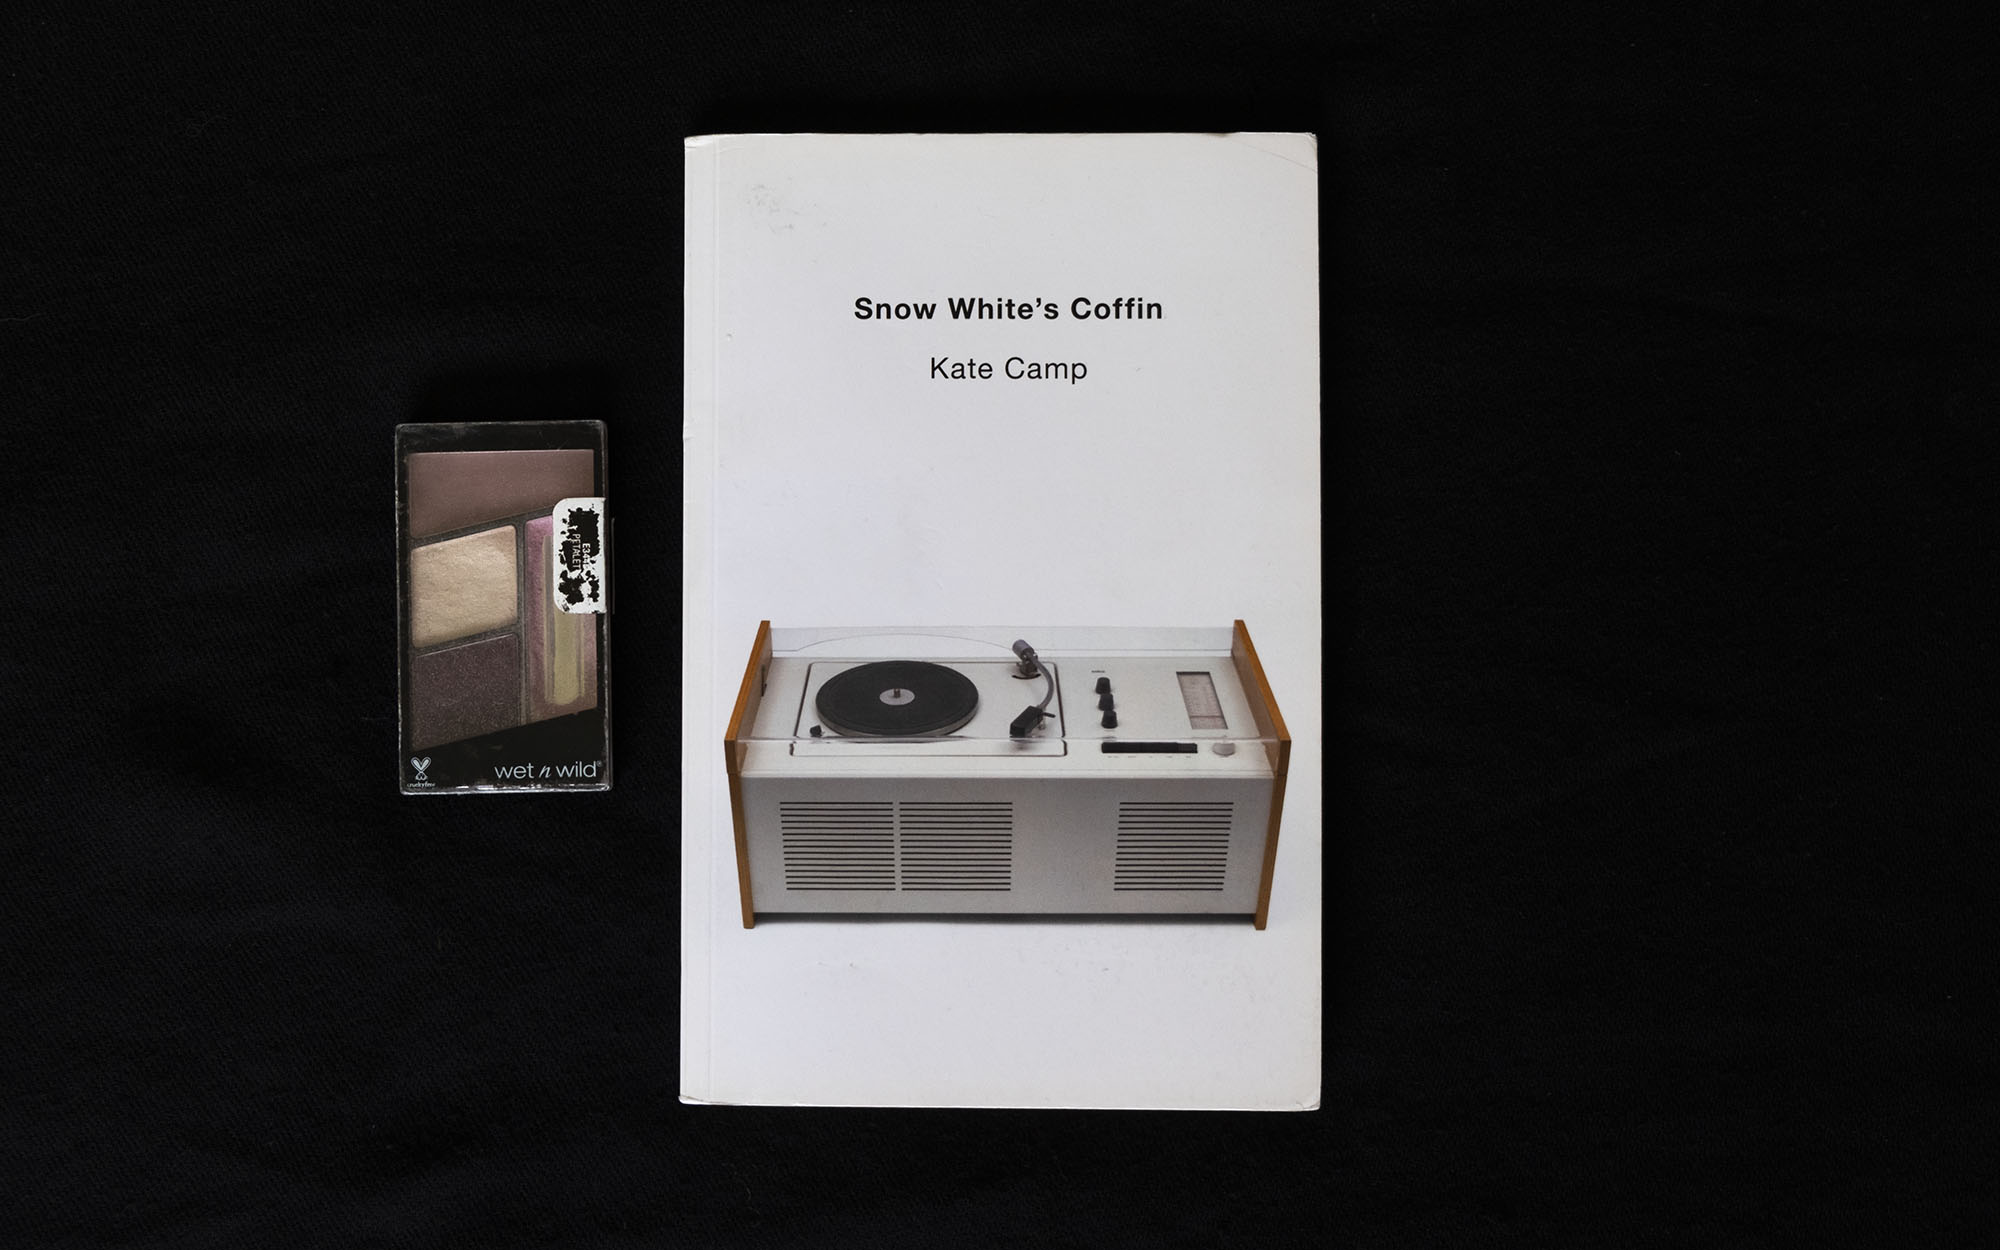 The front cover of the book Snow White’s Coffin by Kate Camp. The cover is white with a classic record player on it. Beside the book is a box of blusher